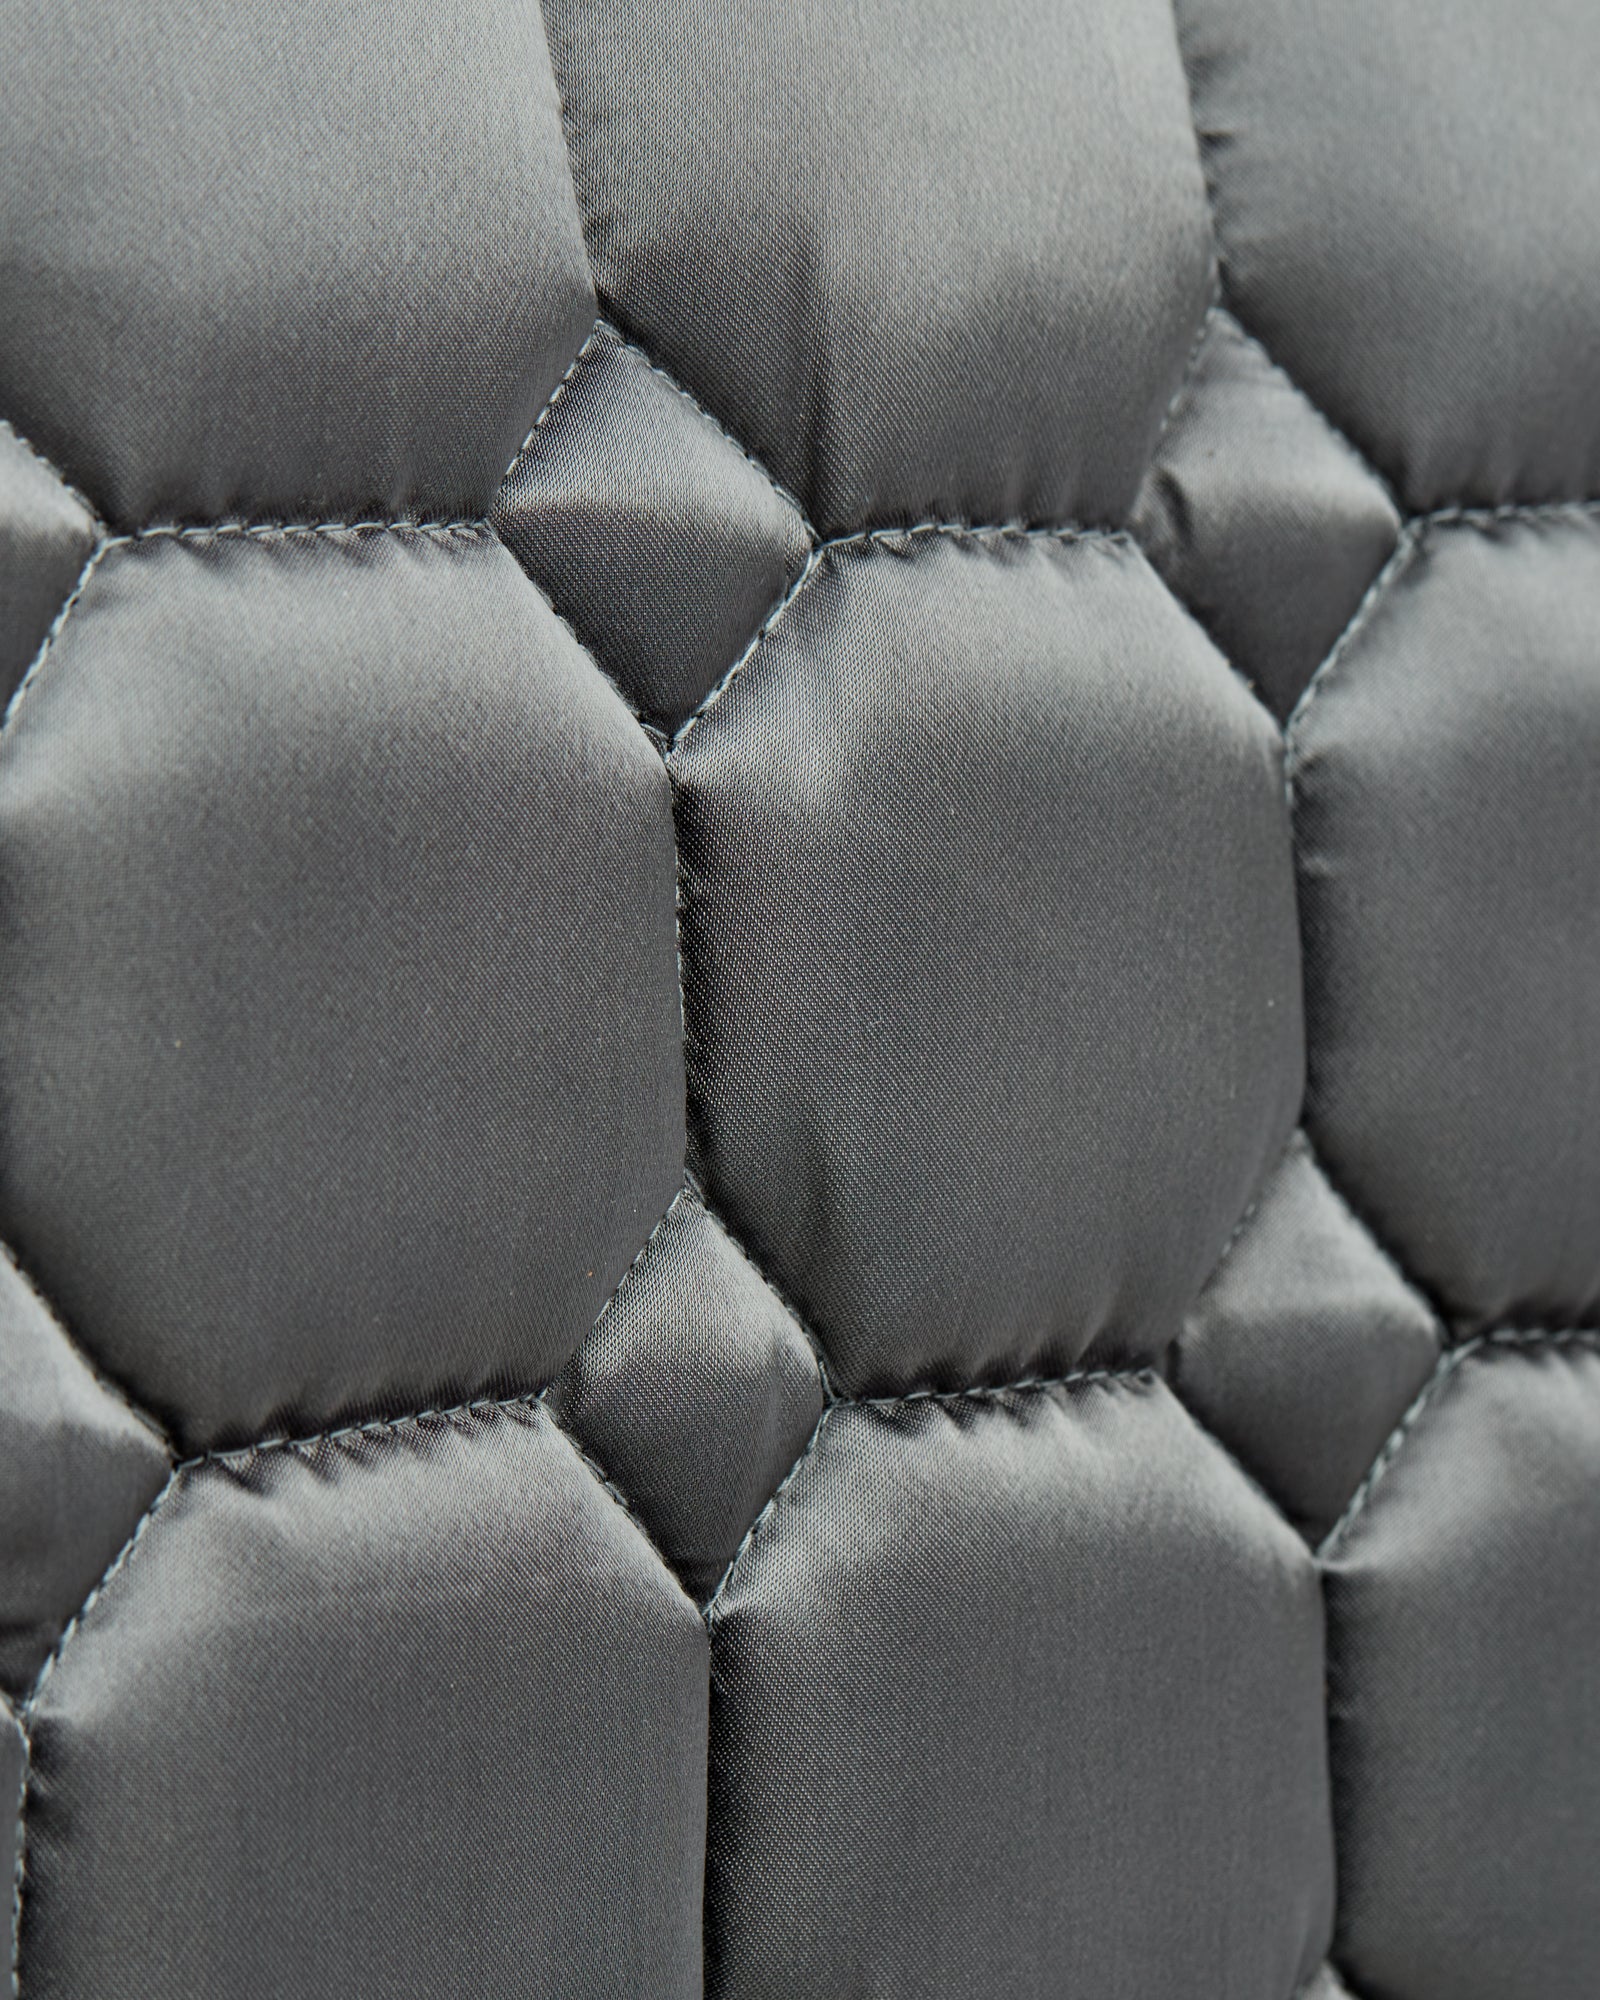 Equestrian luxury quilted grey satin jumping cut saddle pads/numnahs.